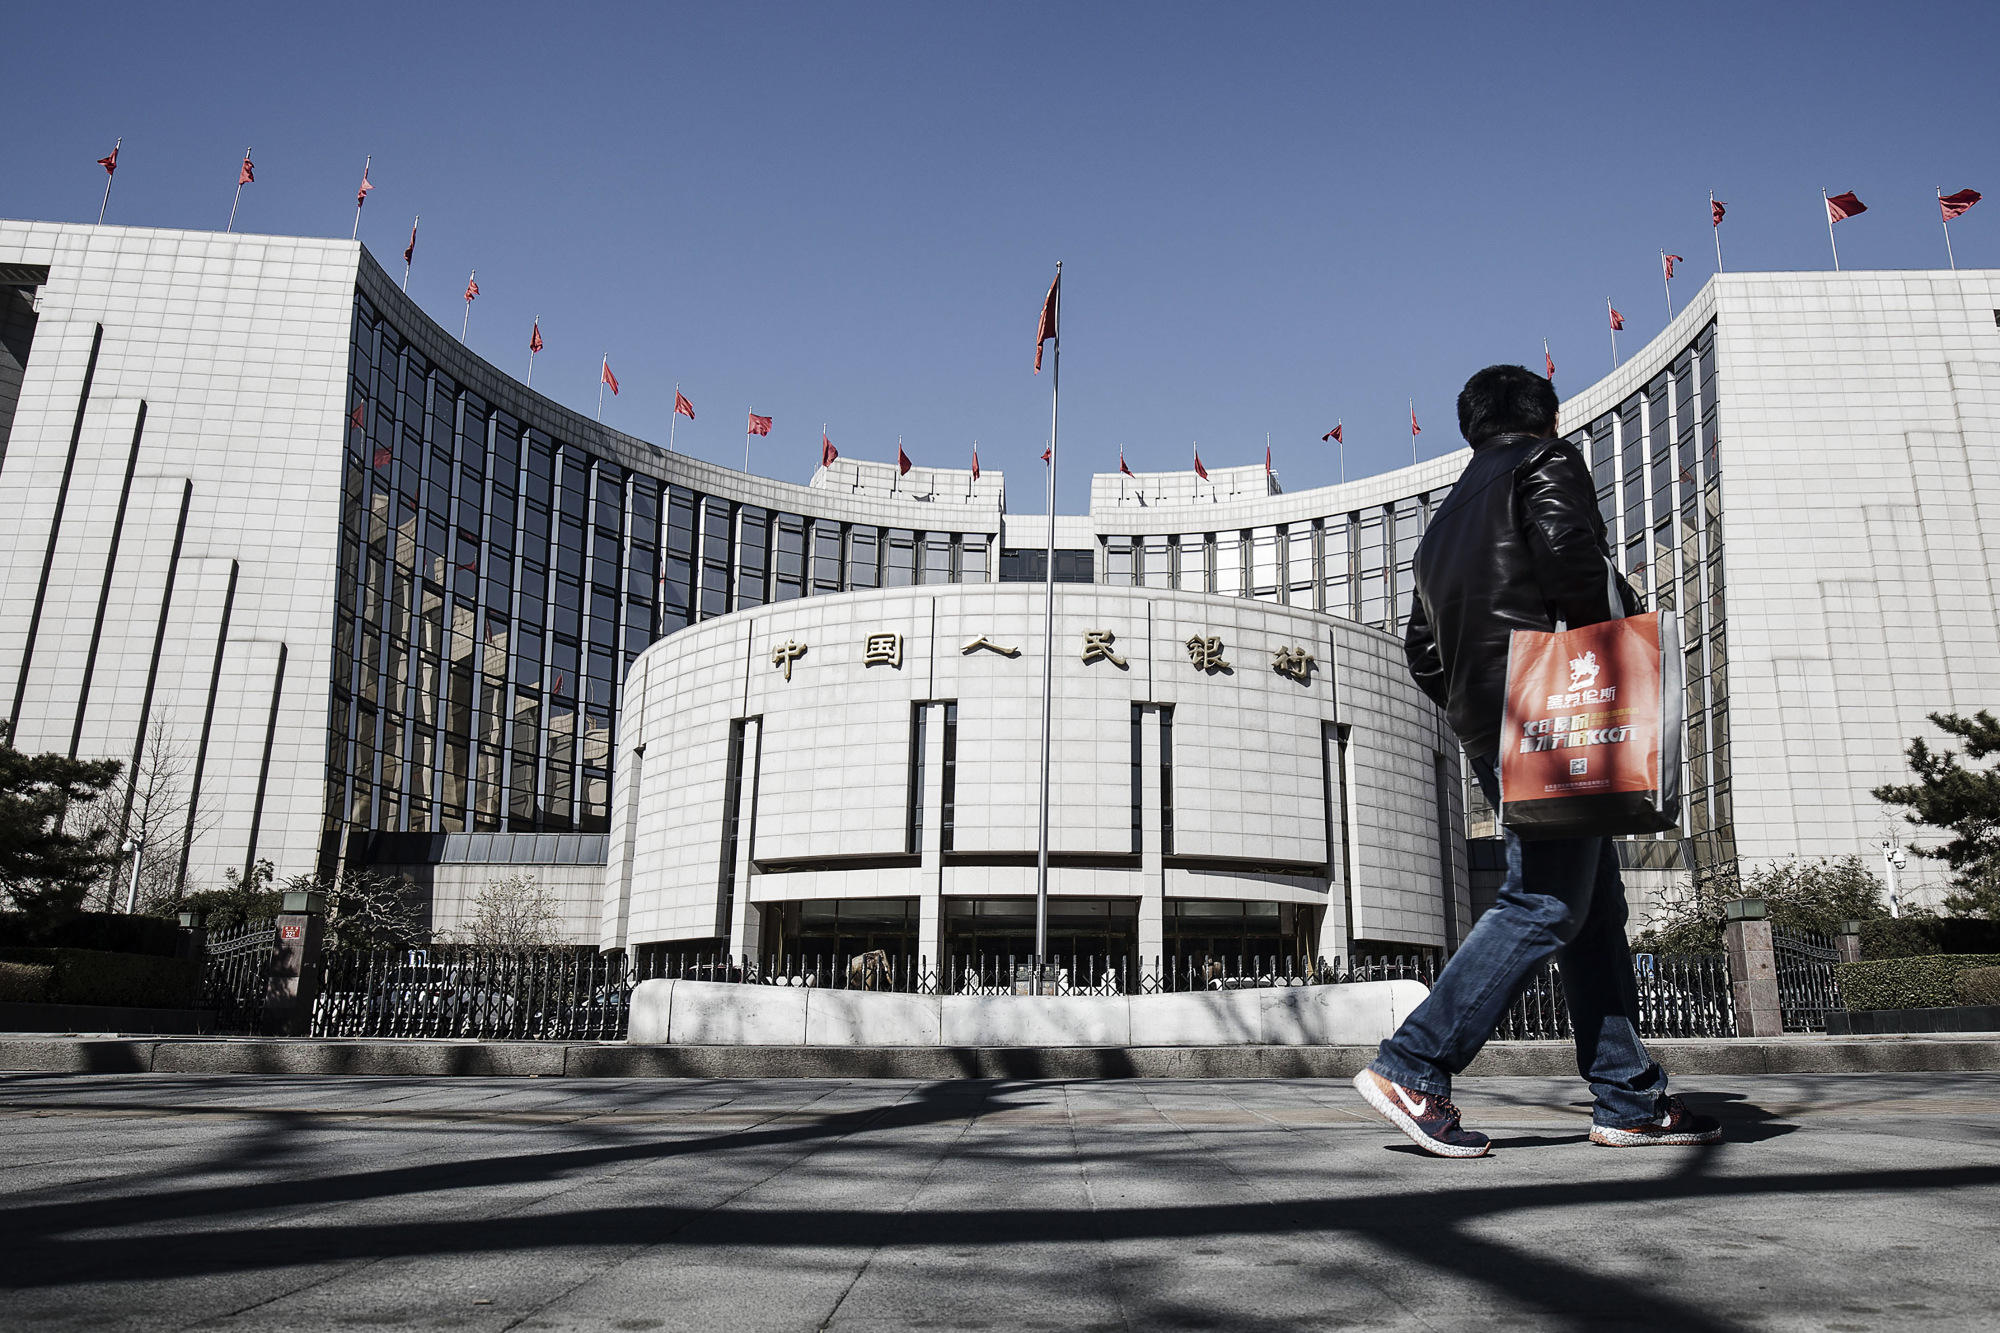 People's Bank Of China Headquarters As China Said To Plan Stricter Bank Capital Rules to Curb Risks
